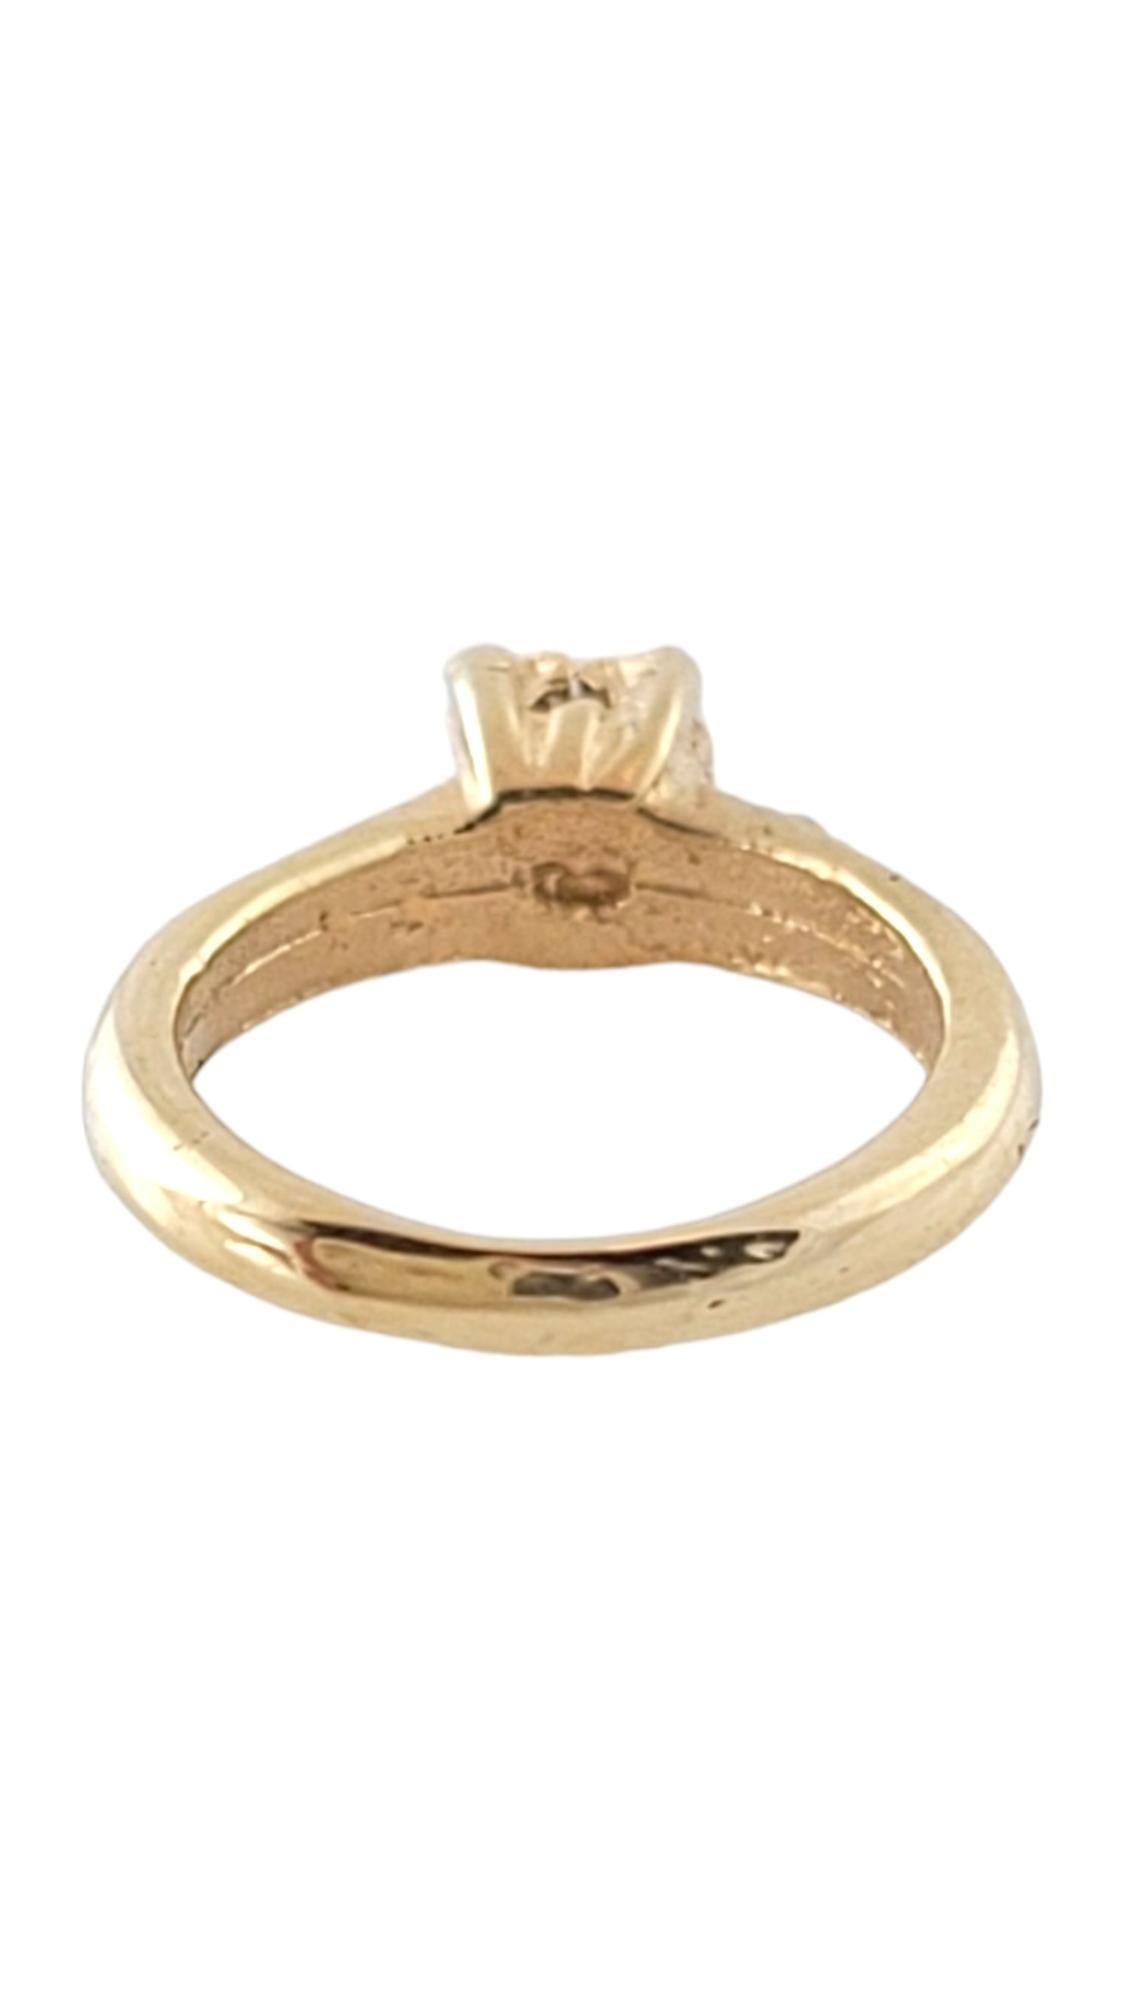 Vintage 14K Yellow Gold Engagement Ring Charm #16934 In Good Condition For Sale In Washington Depot, CT